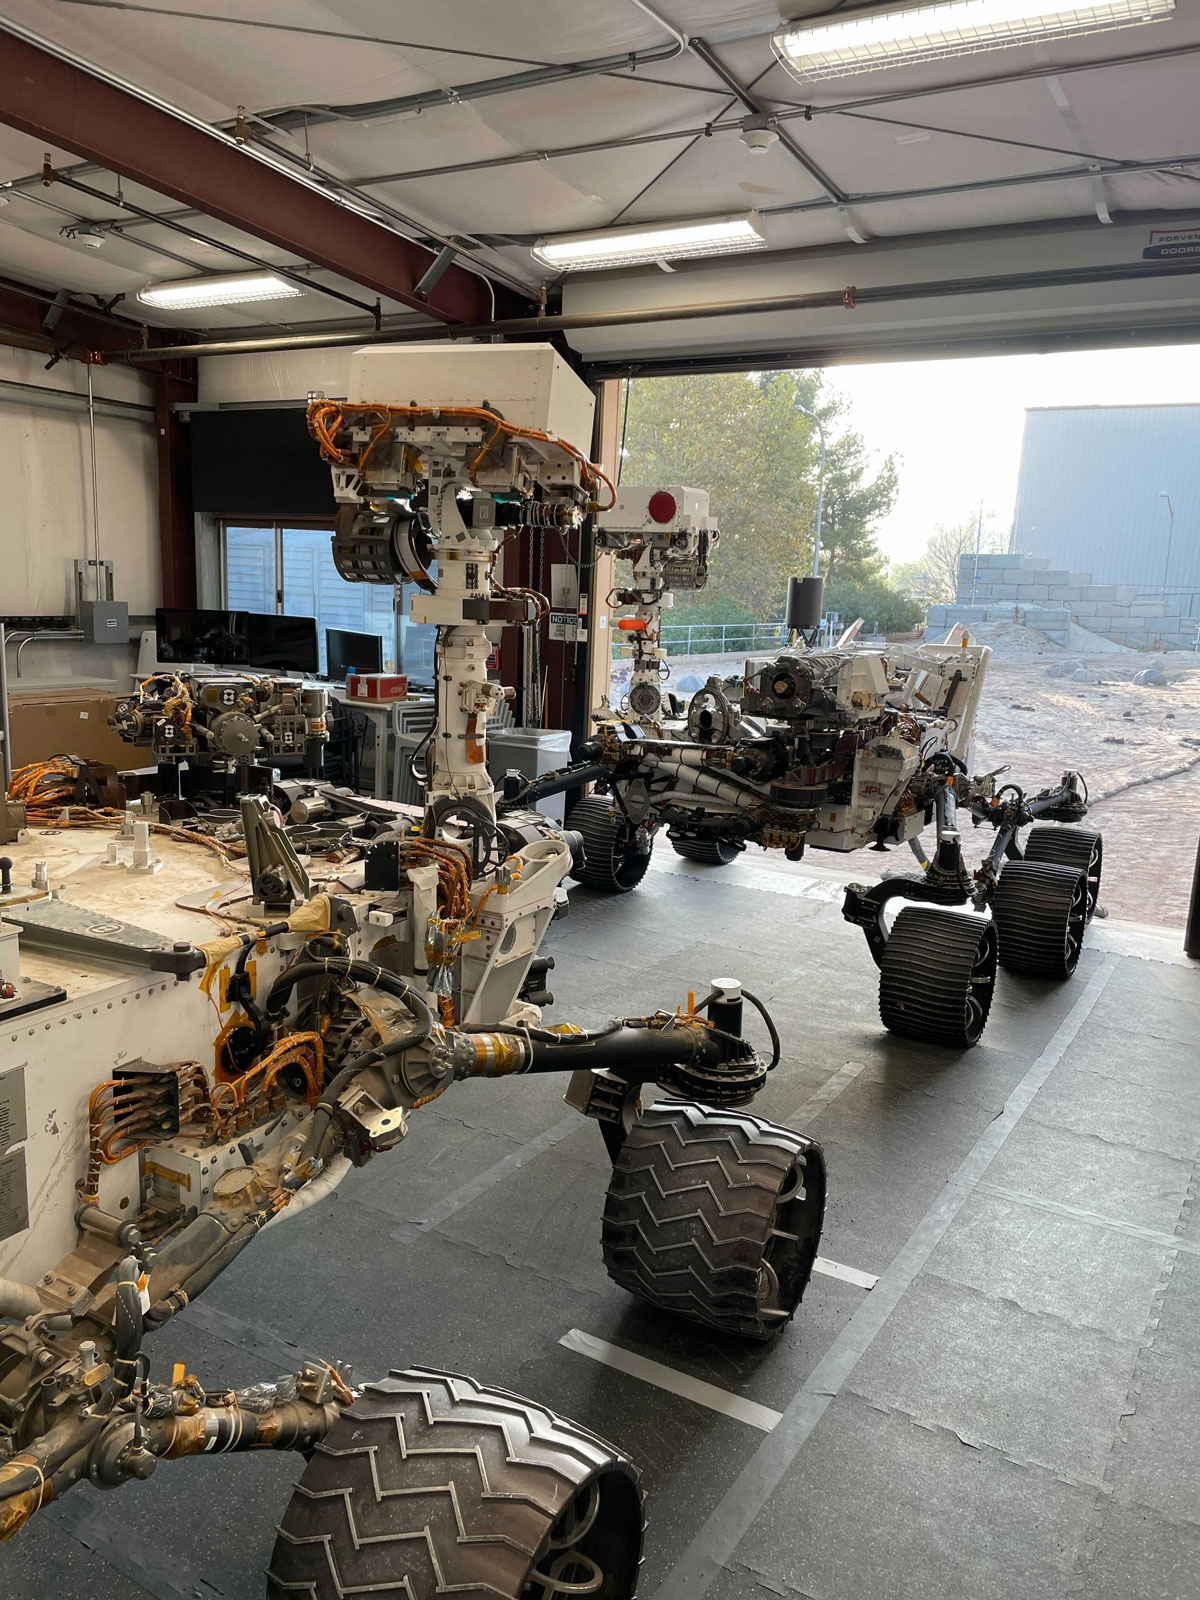 Engineering models of the Curiosity Mars rover (foreground) and the Perseverance Mars rover share space in the garage at JPL’s Mars Yard.